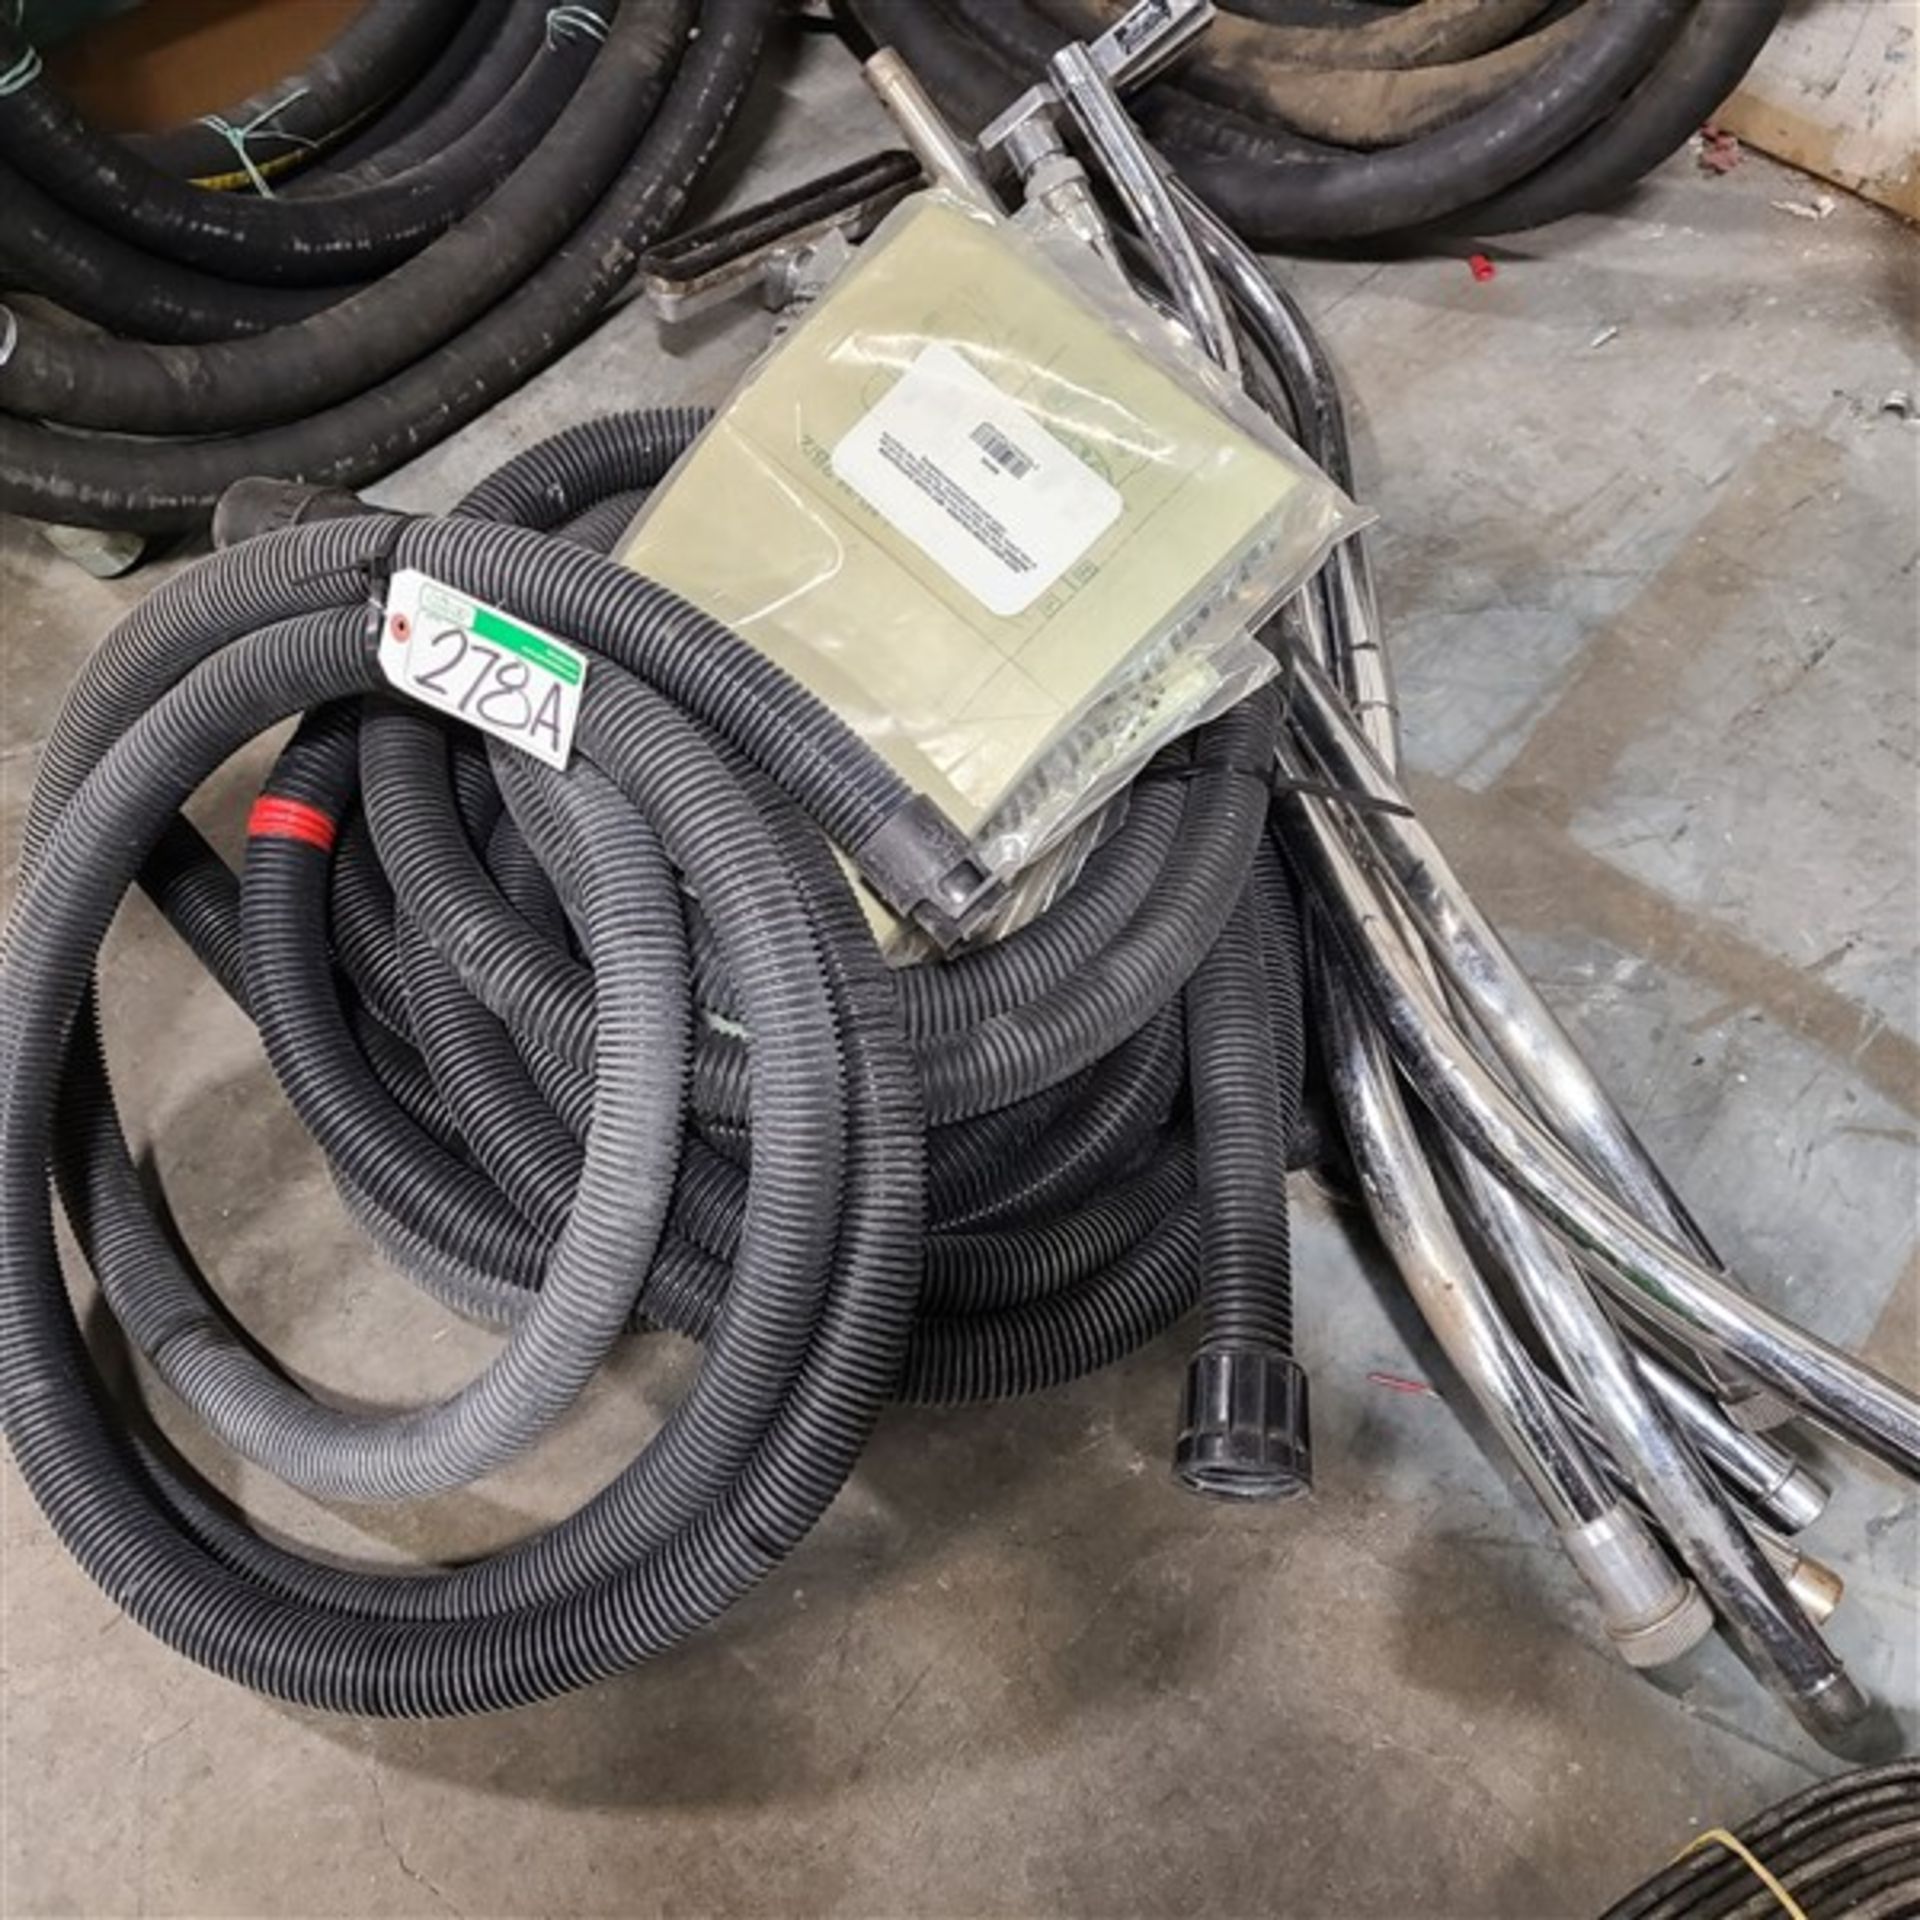 LOT OF VACUUM CLEANER HOSE, WANDS AND BAGS